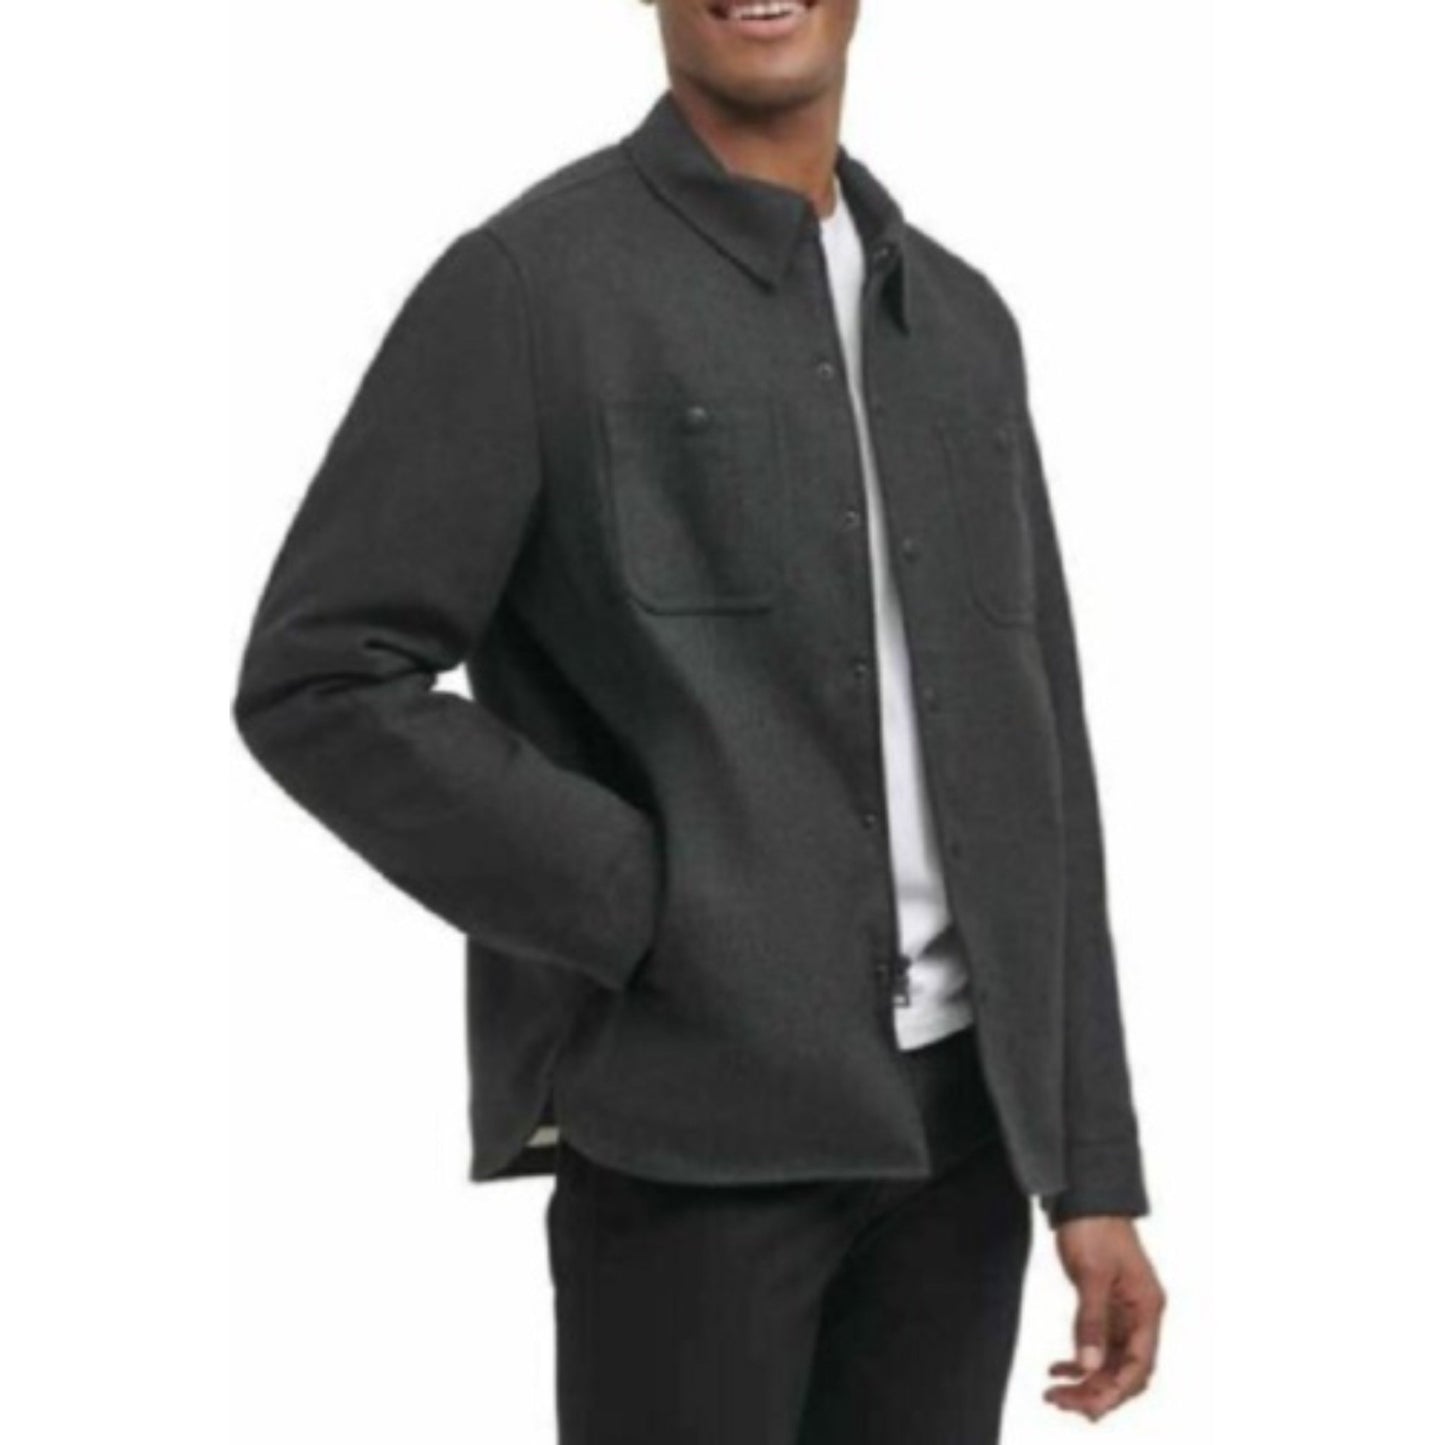 GH Bass & Co Men's Wool Blended Lined Jacket, Charcoal